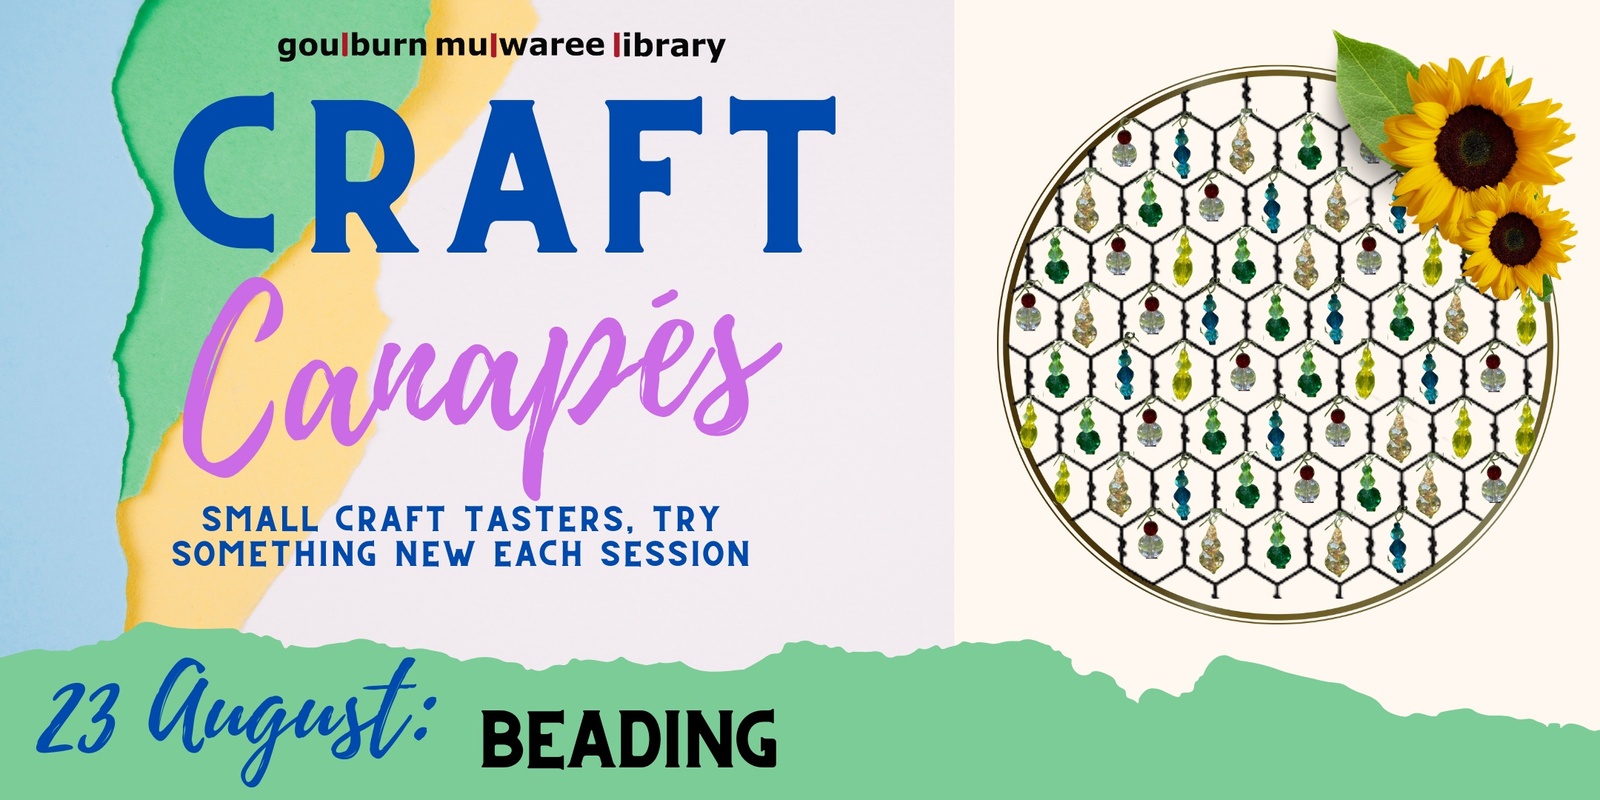 Banner image for Craft Canapés - Beaded Suncatchers